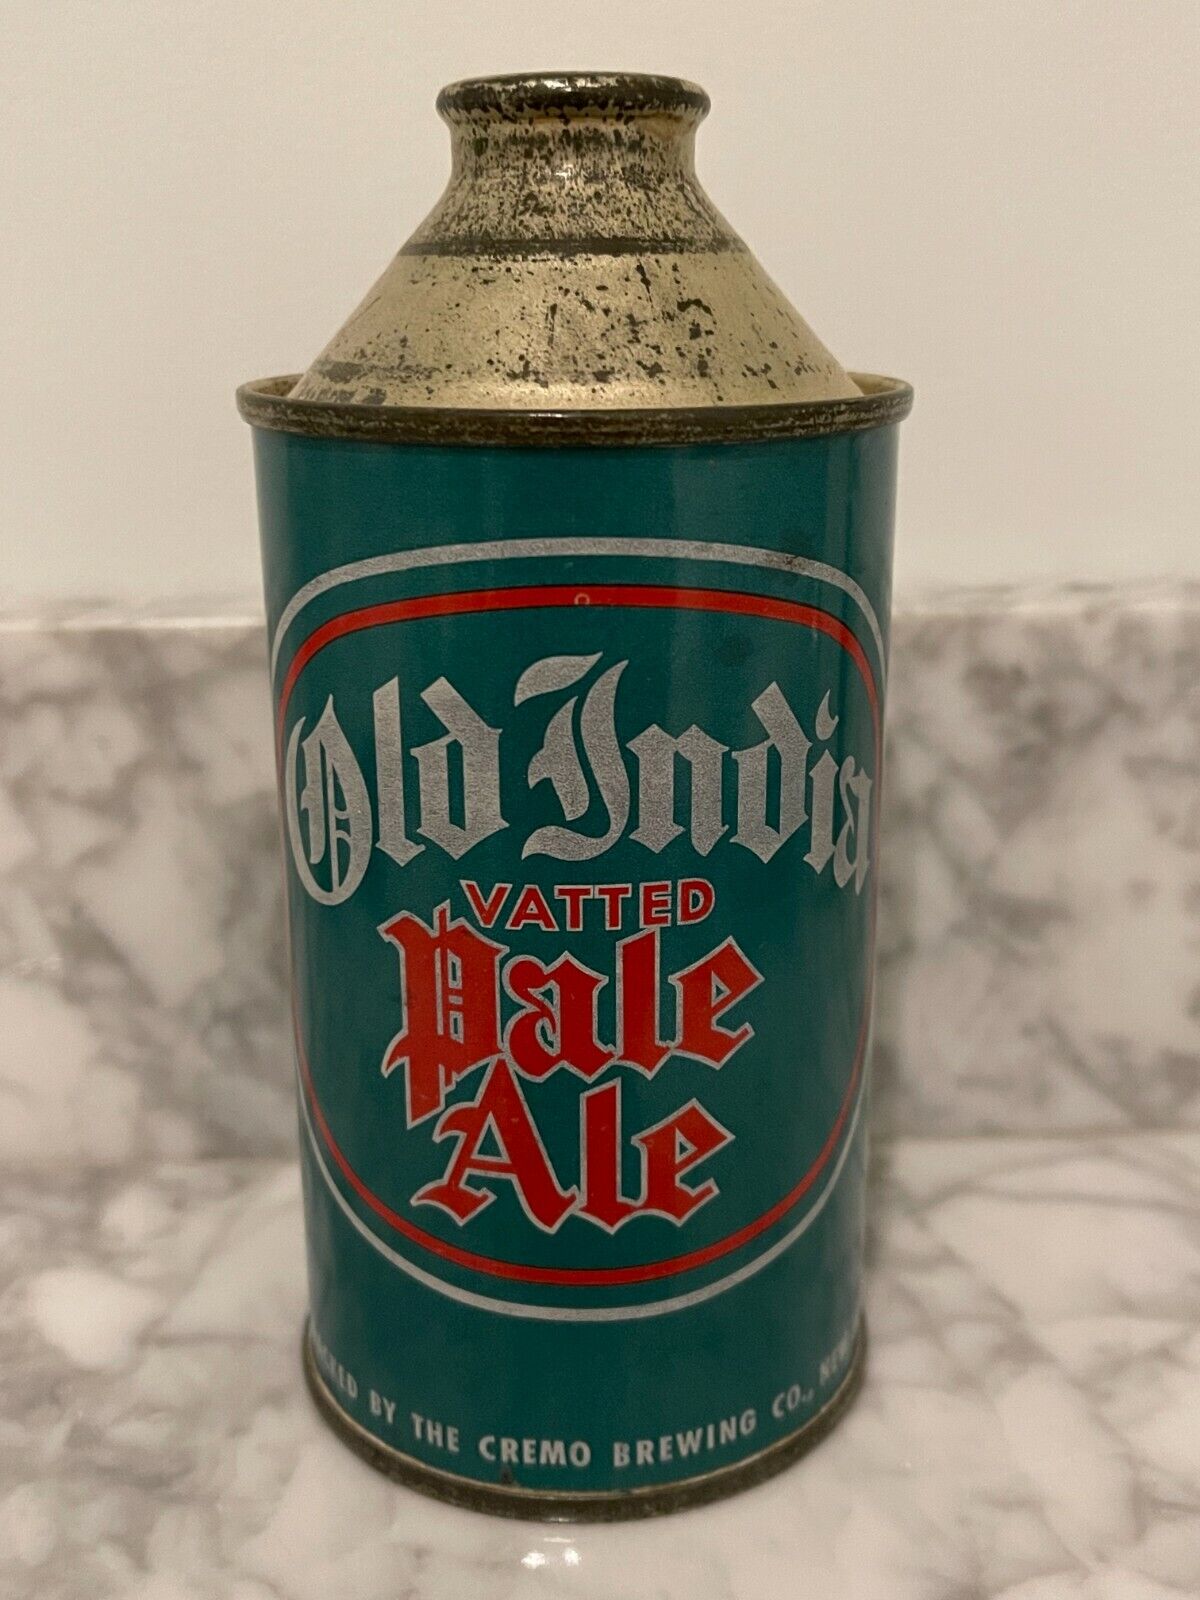 Old India Vatted Pale Ale Cone Top Beer Can, Cremo Brewing, New Britain, CT